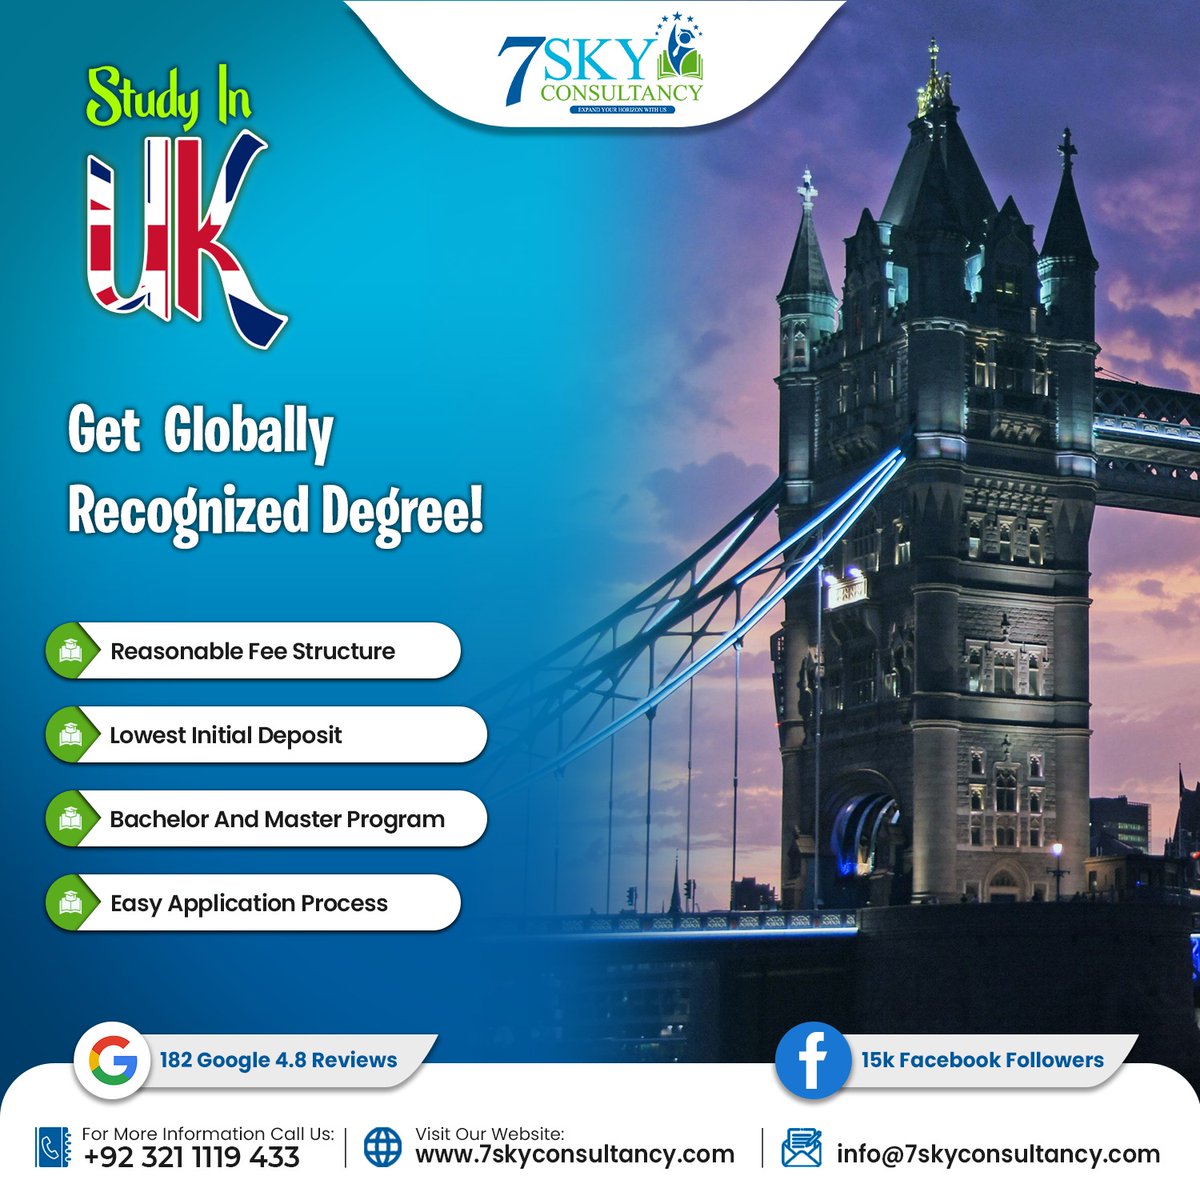 Pursue your studies in the UK! Bachelor & Master programs available, Multiple English tests accepted, Hassle-free application process, Lowest initial deposit required Get a quick offer letter Get a FREE consultation today 7skyconsultancy.com/apply-now.php #studyabroad #studyinuk